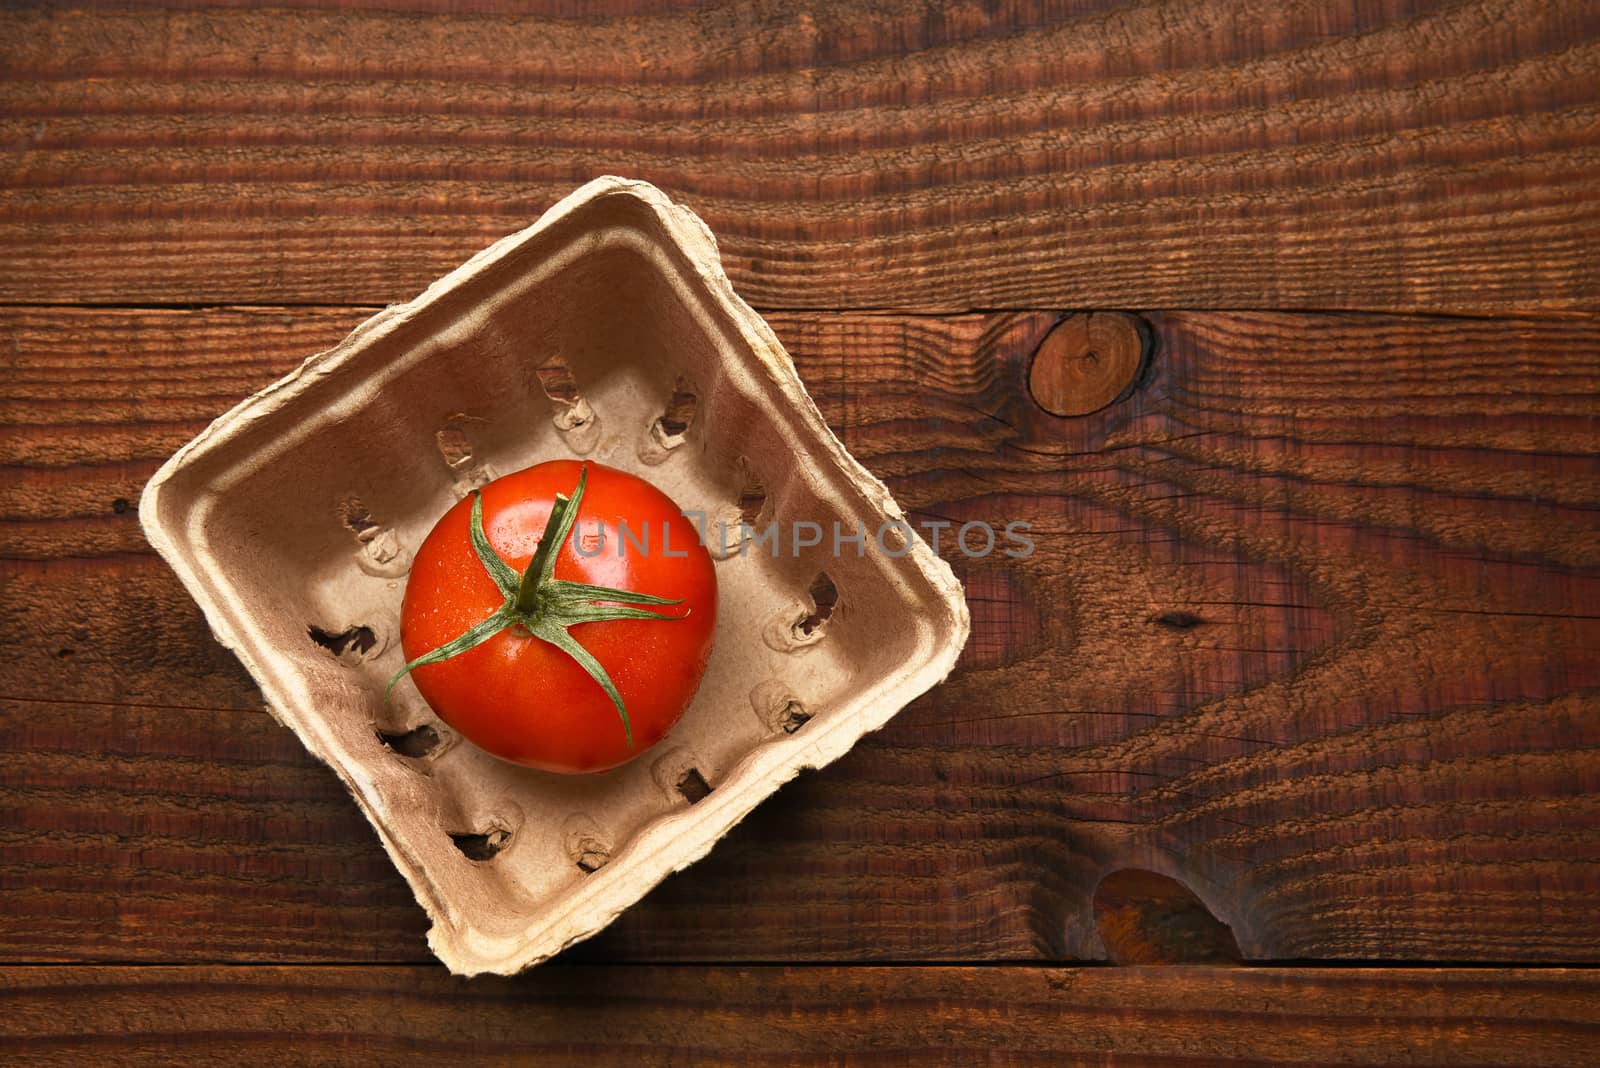 High angle view of a single tomato in a cardboard produce container on a dark wood surface.